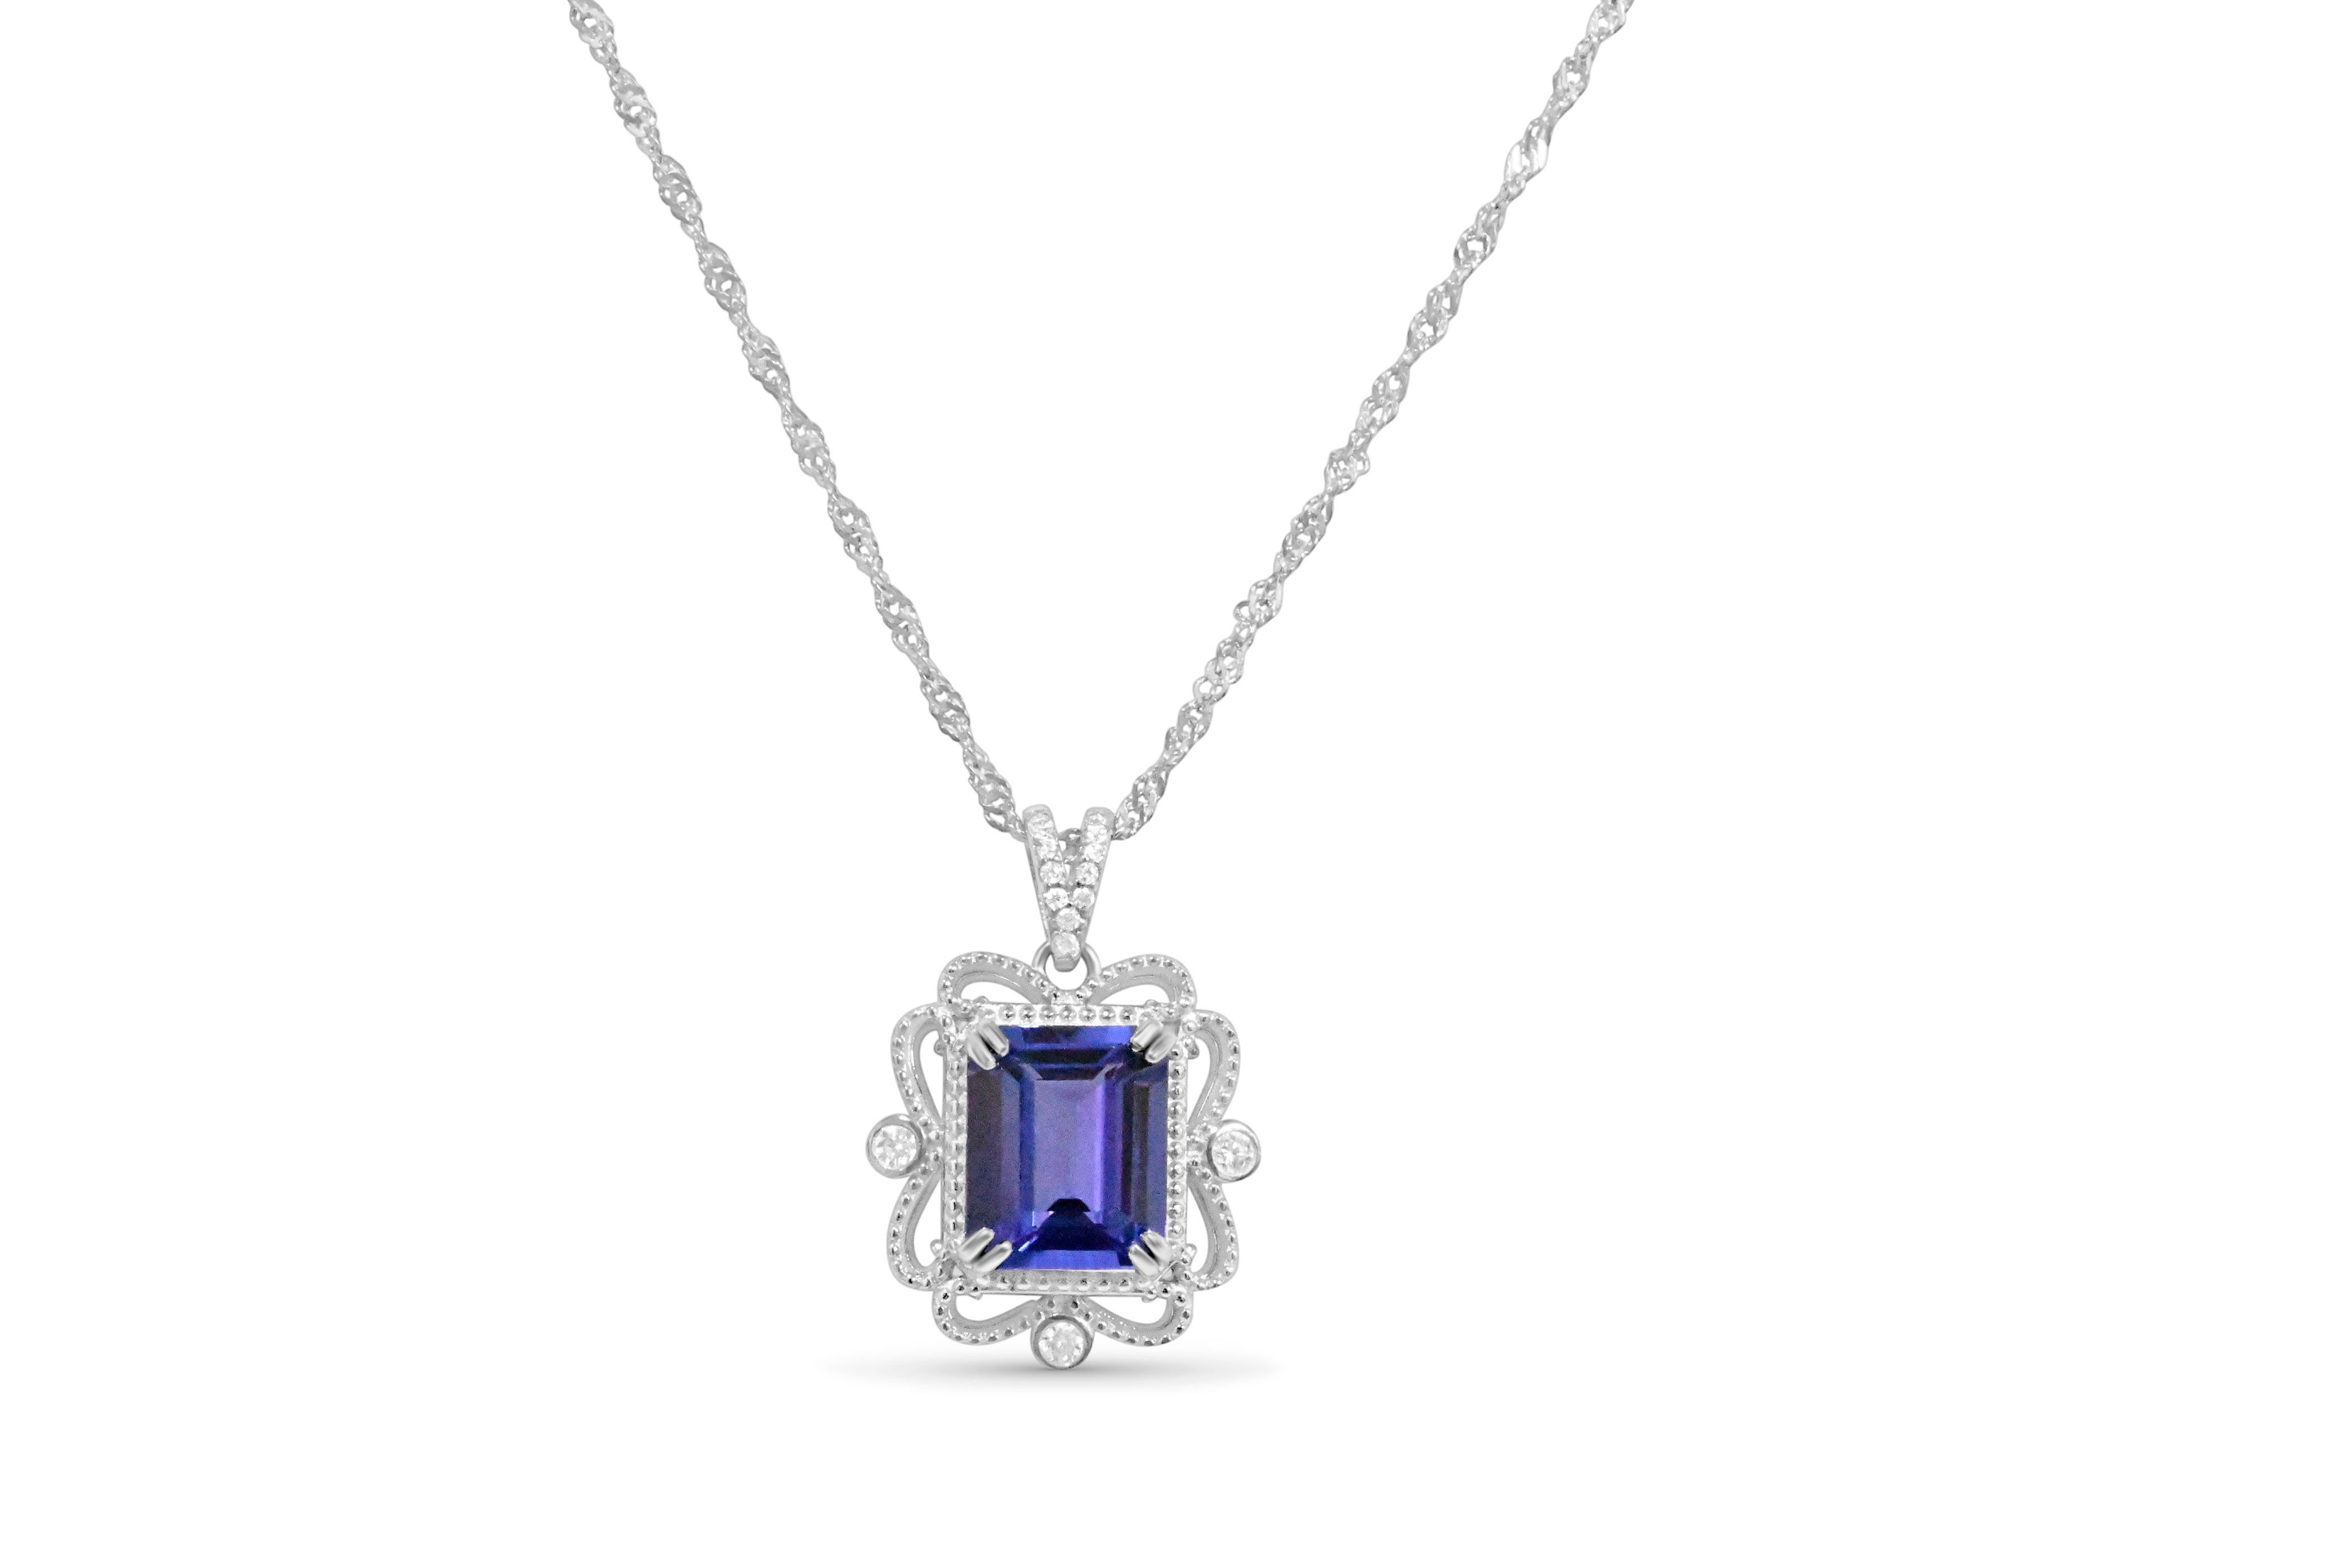 Tanzanite 925 Sterling Sliver Rhodium  Metal Platted Women's Pendant 4.22cts
Primary Stone : Tanzanite 
Stone Shape ; 11 x 9mm  Emerald
Stone Weight : 4.22cts
Metal weight : 2.16g

Secondary Stone ; White CZ
No of Stone:10 pieces